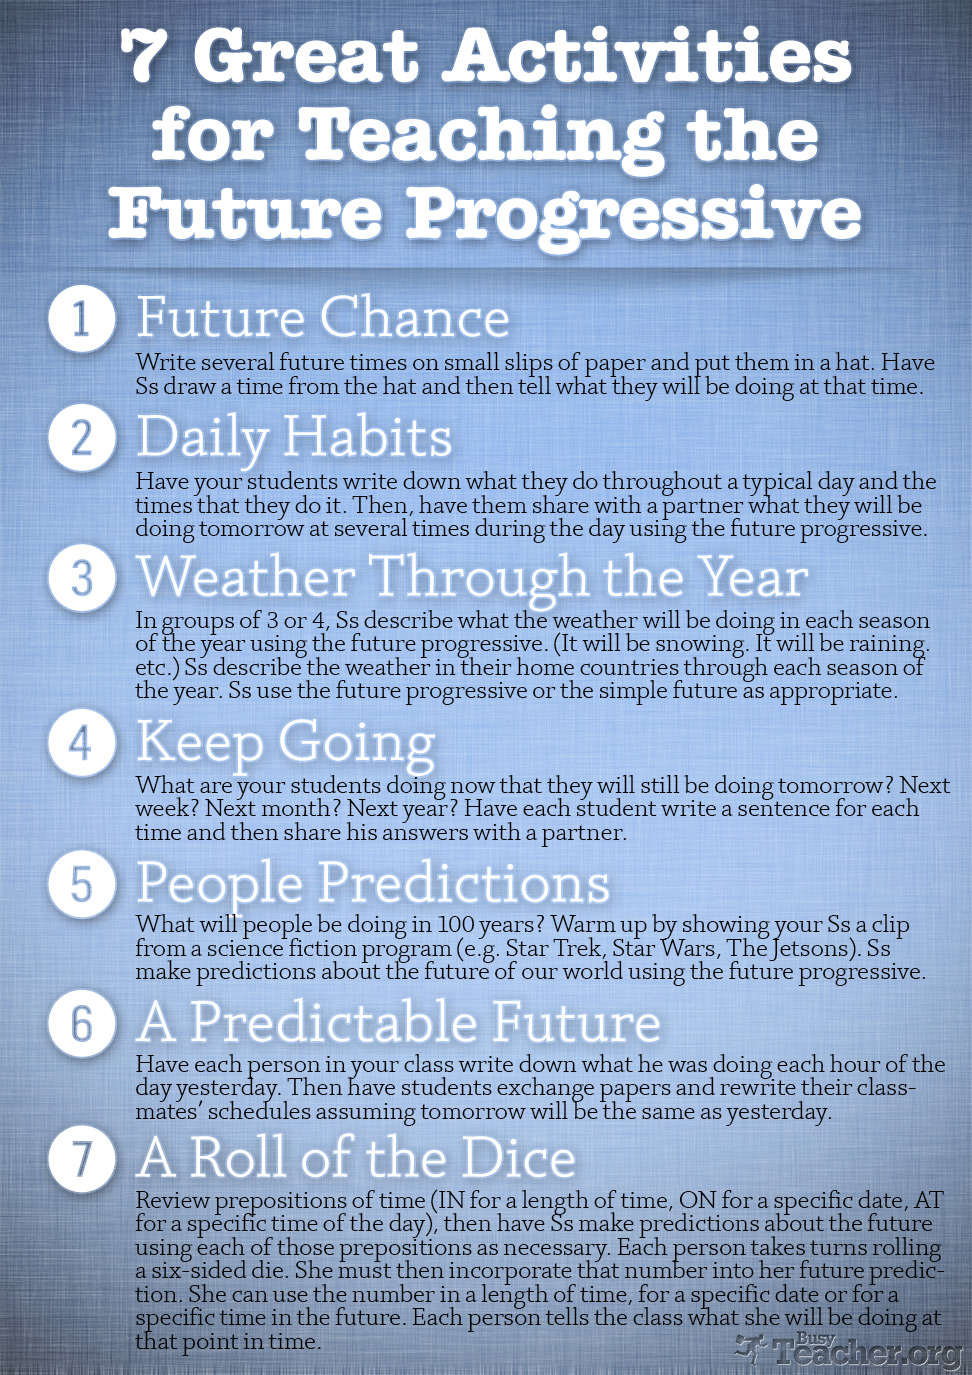 POSTER: 7 Great Activities to Teach the Future Progressive